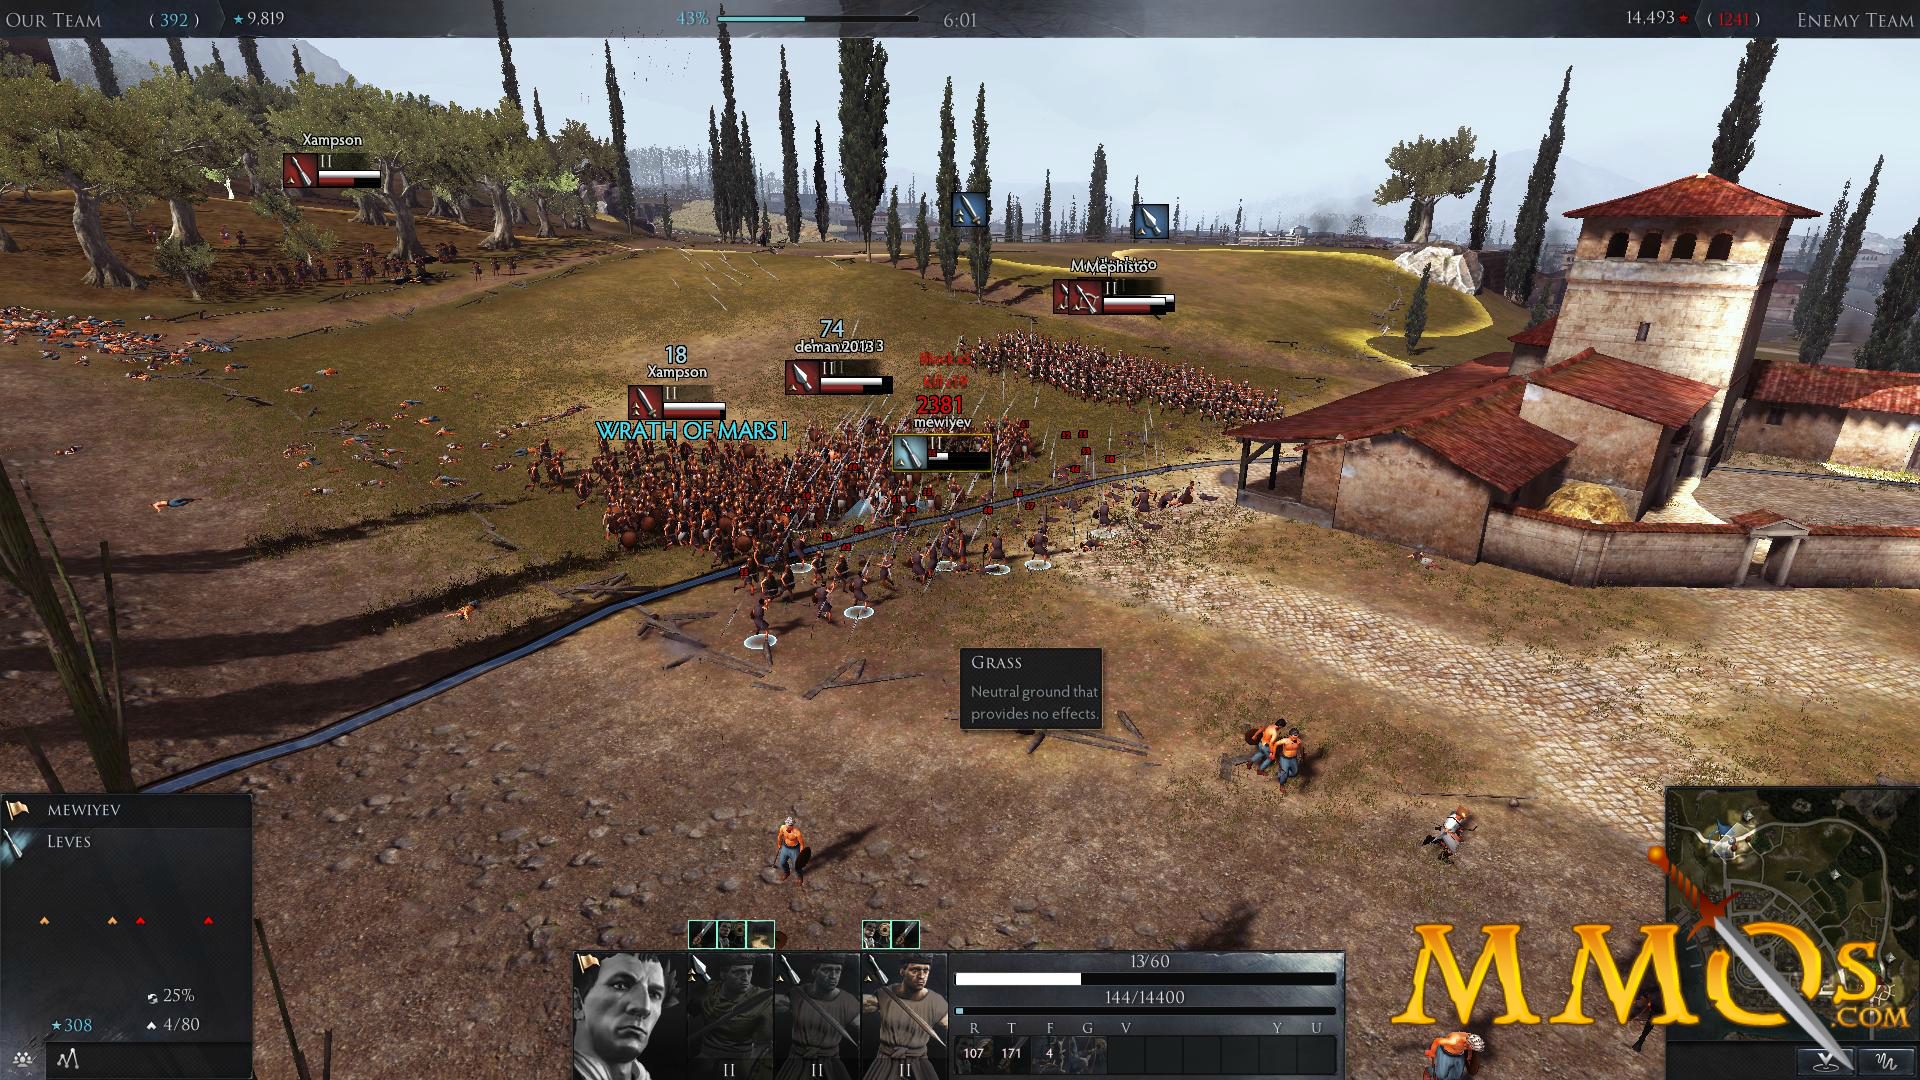 Total War: Arena is shutting down early next year